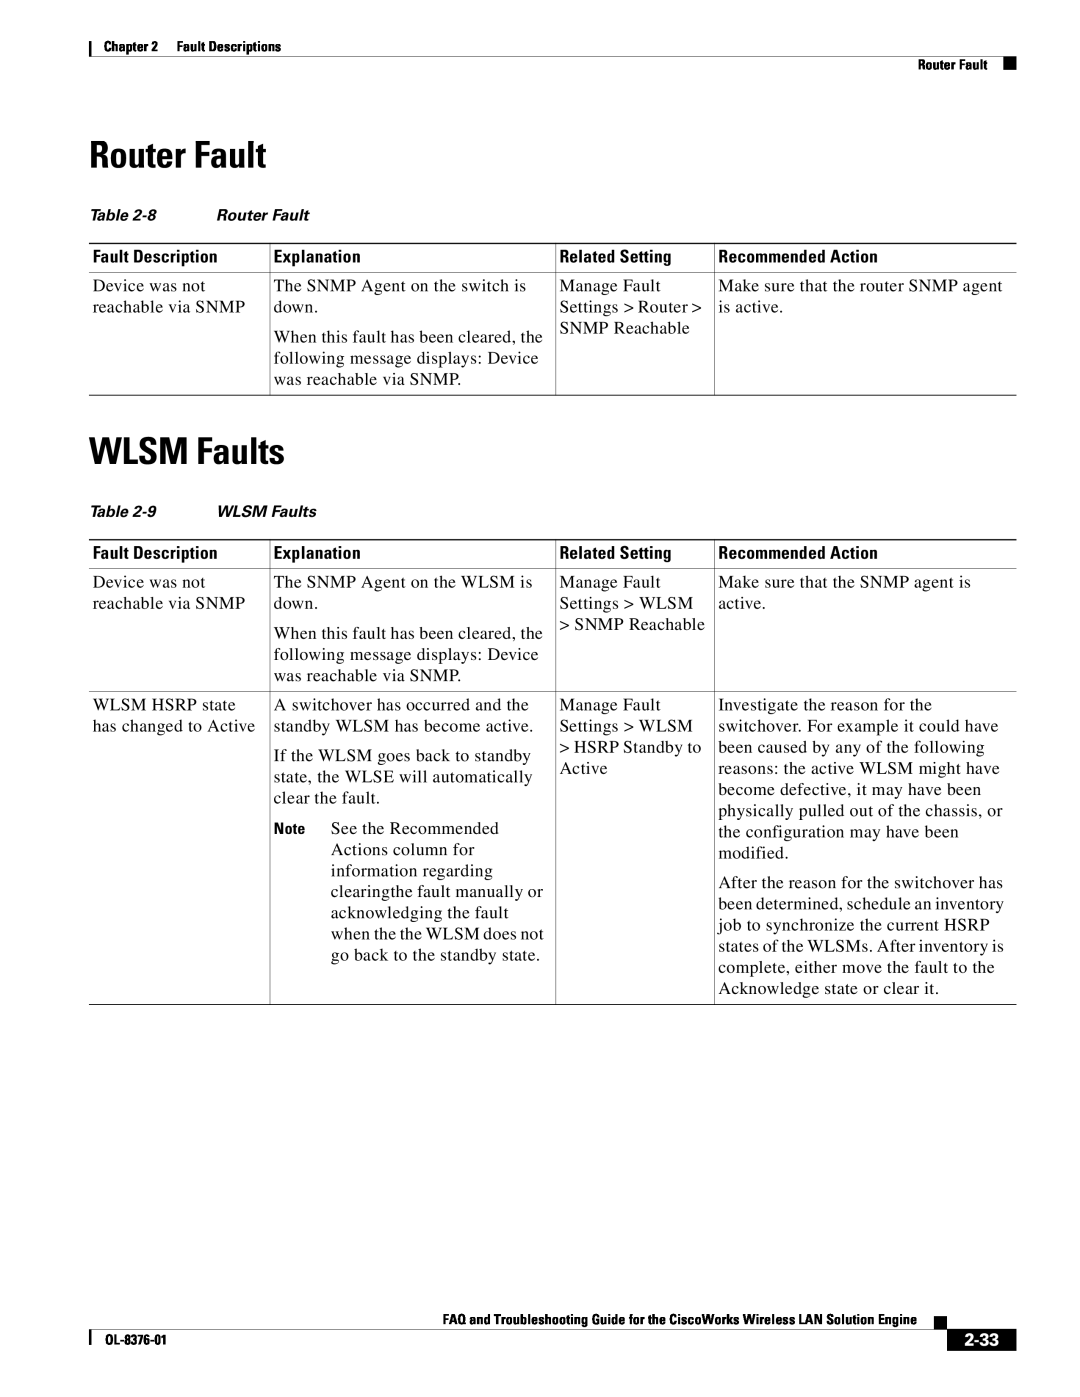 Cisco Systems OL-8376-01 manual Router Fault, WLSM Faults, 2-33, Fault Description, Explanation, Related Setting 